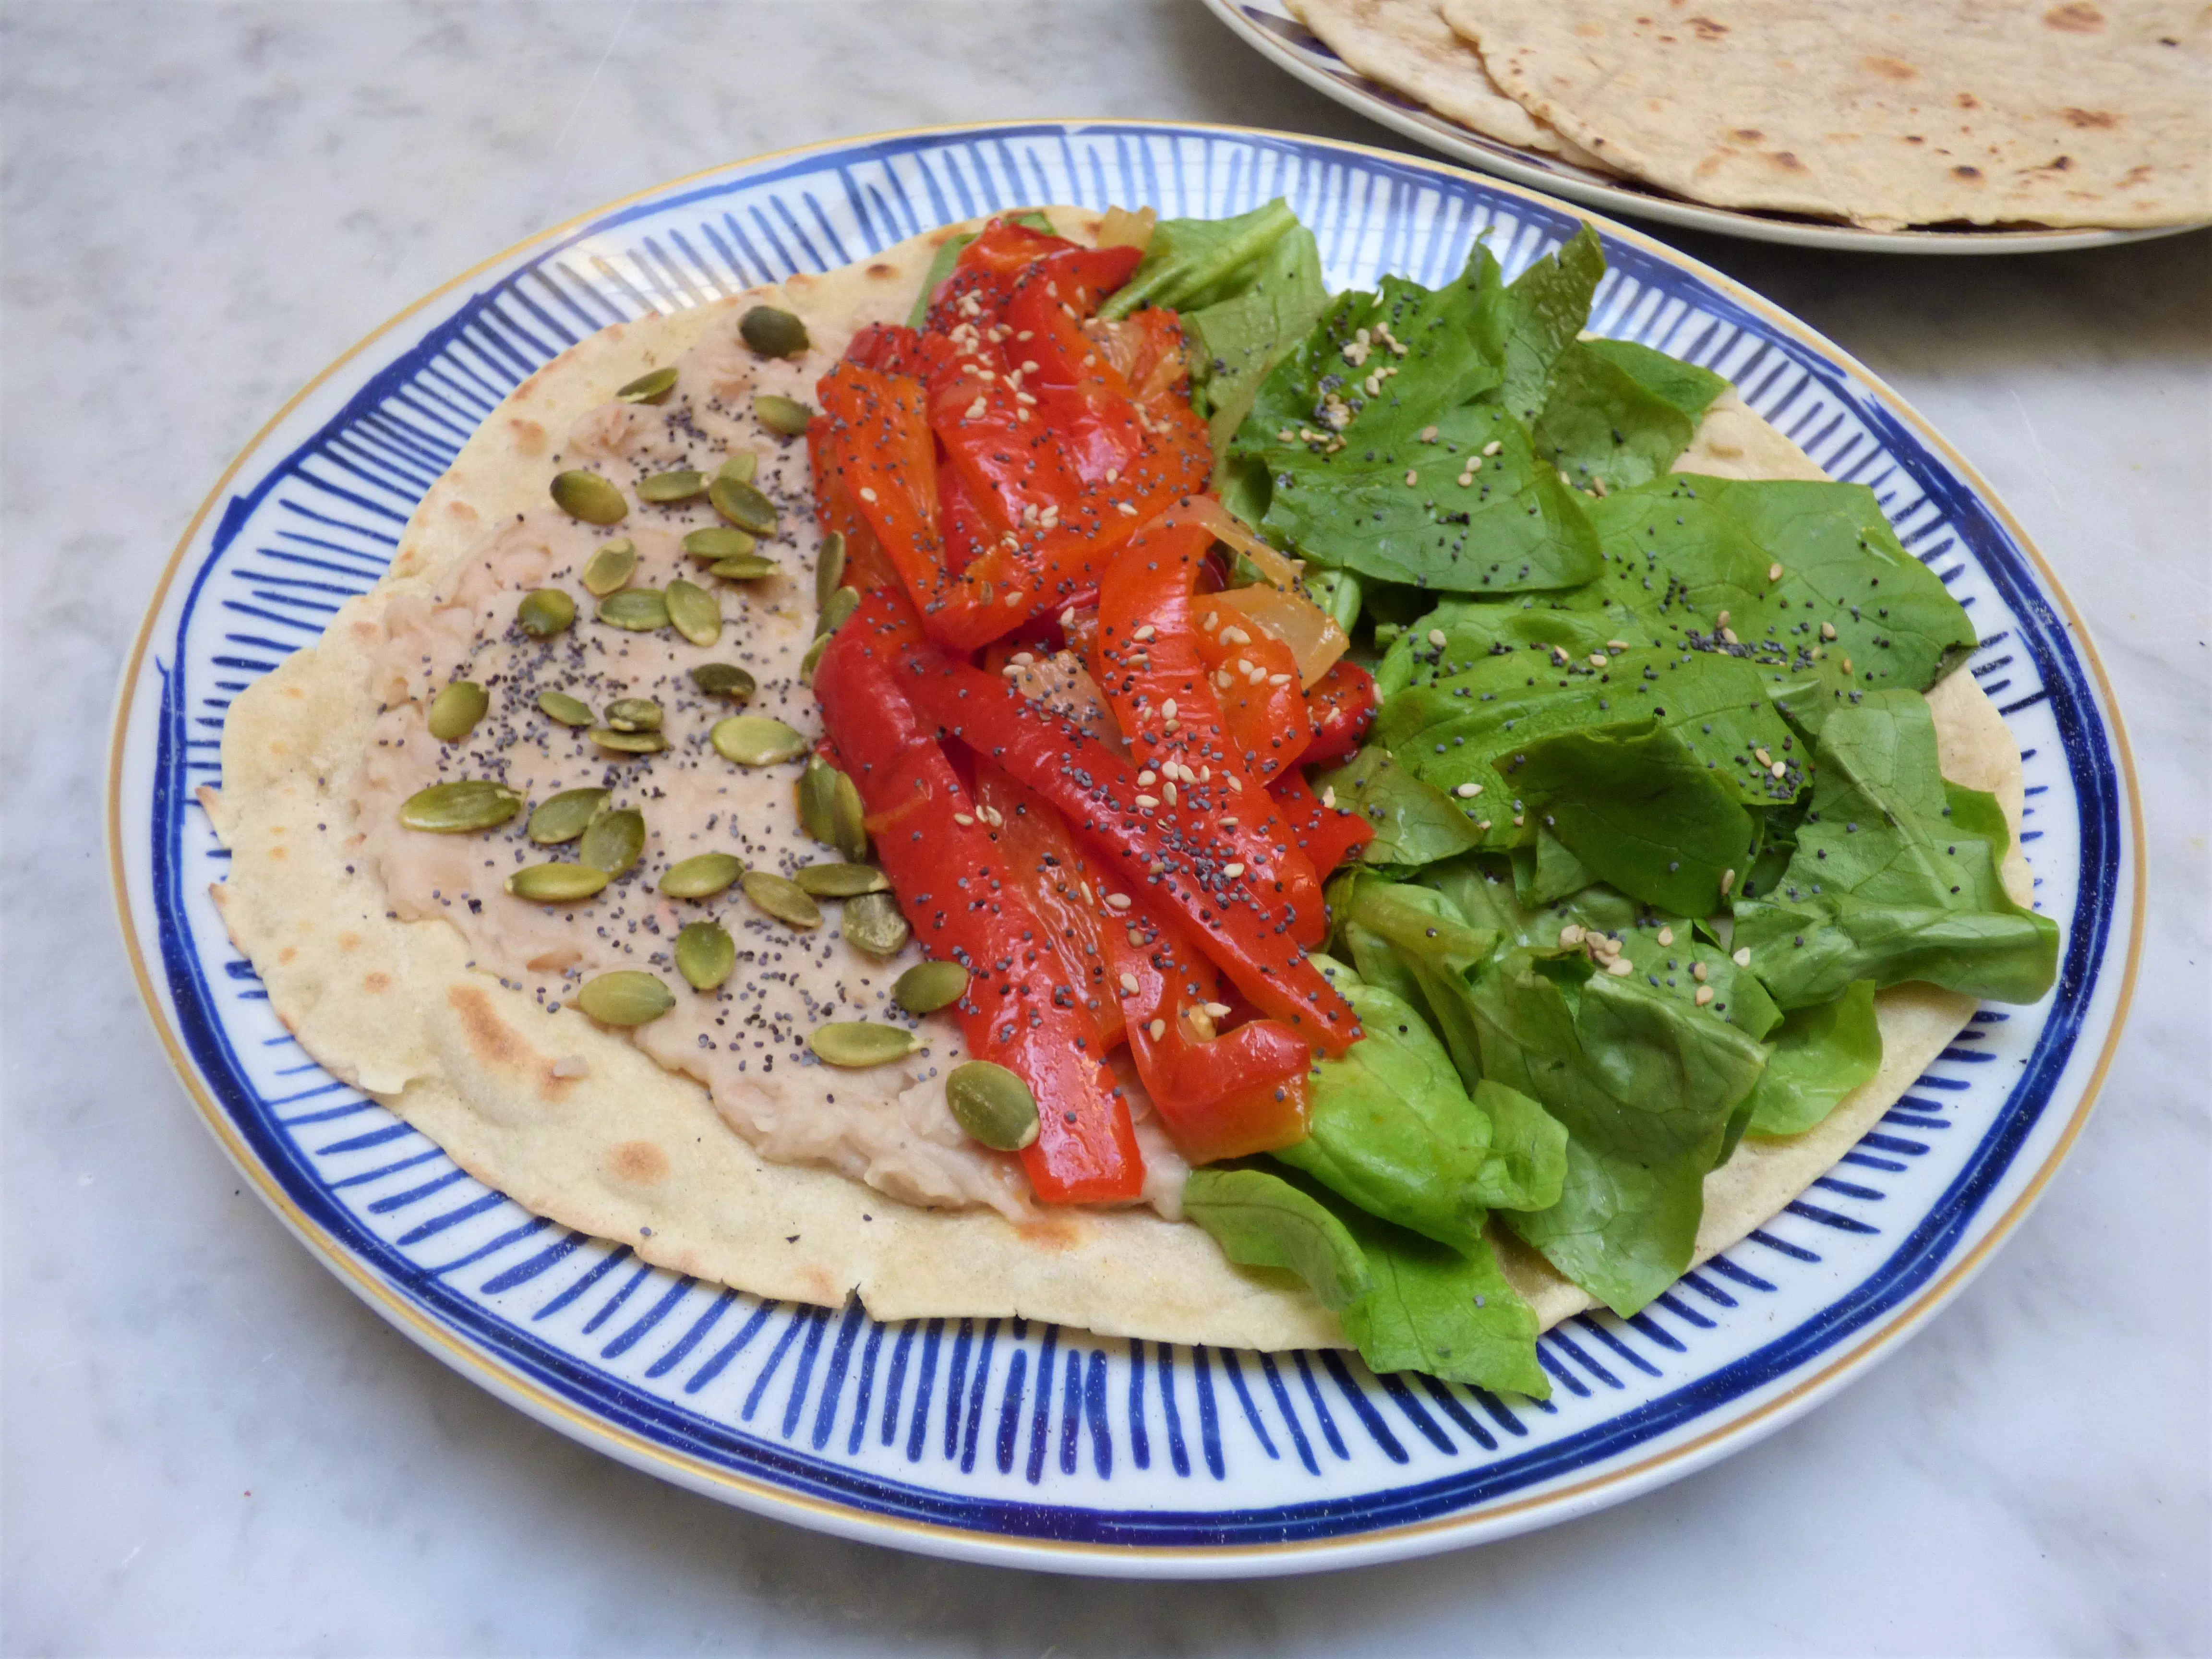 Spelt piadina with hummus and vegetables